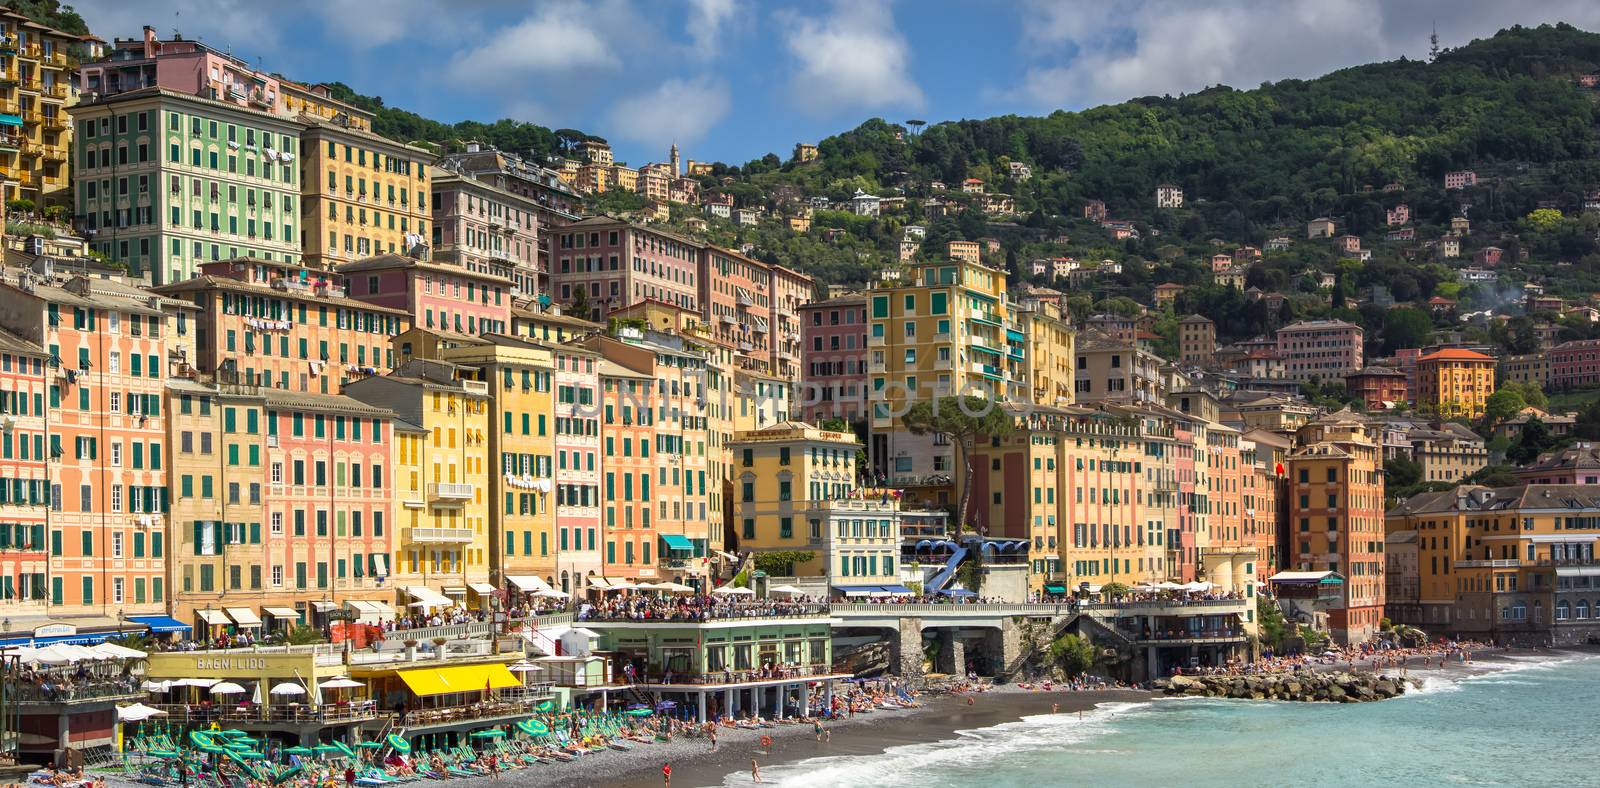 View of the coast of Camogli in Liguria by goghy73